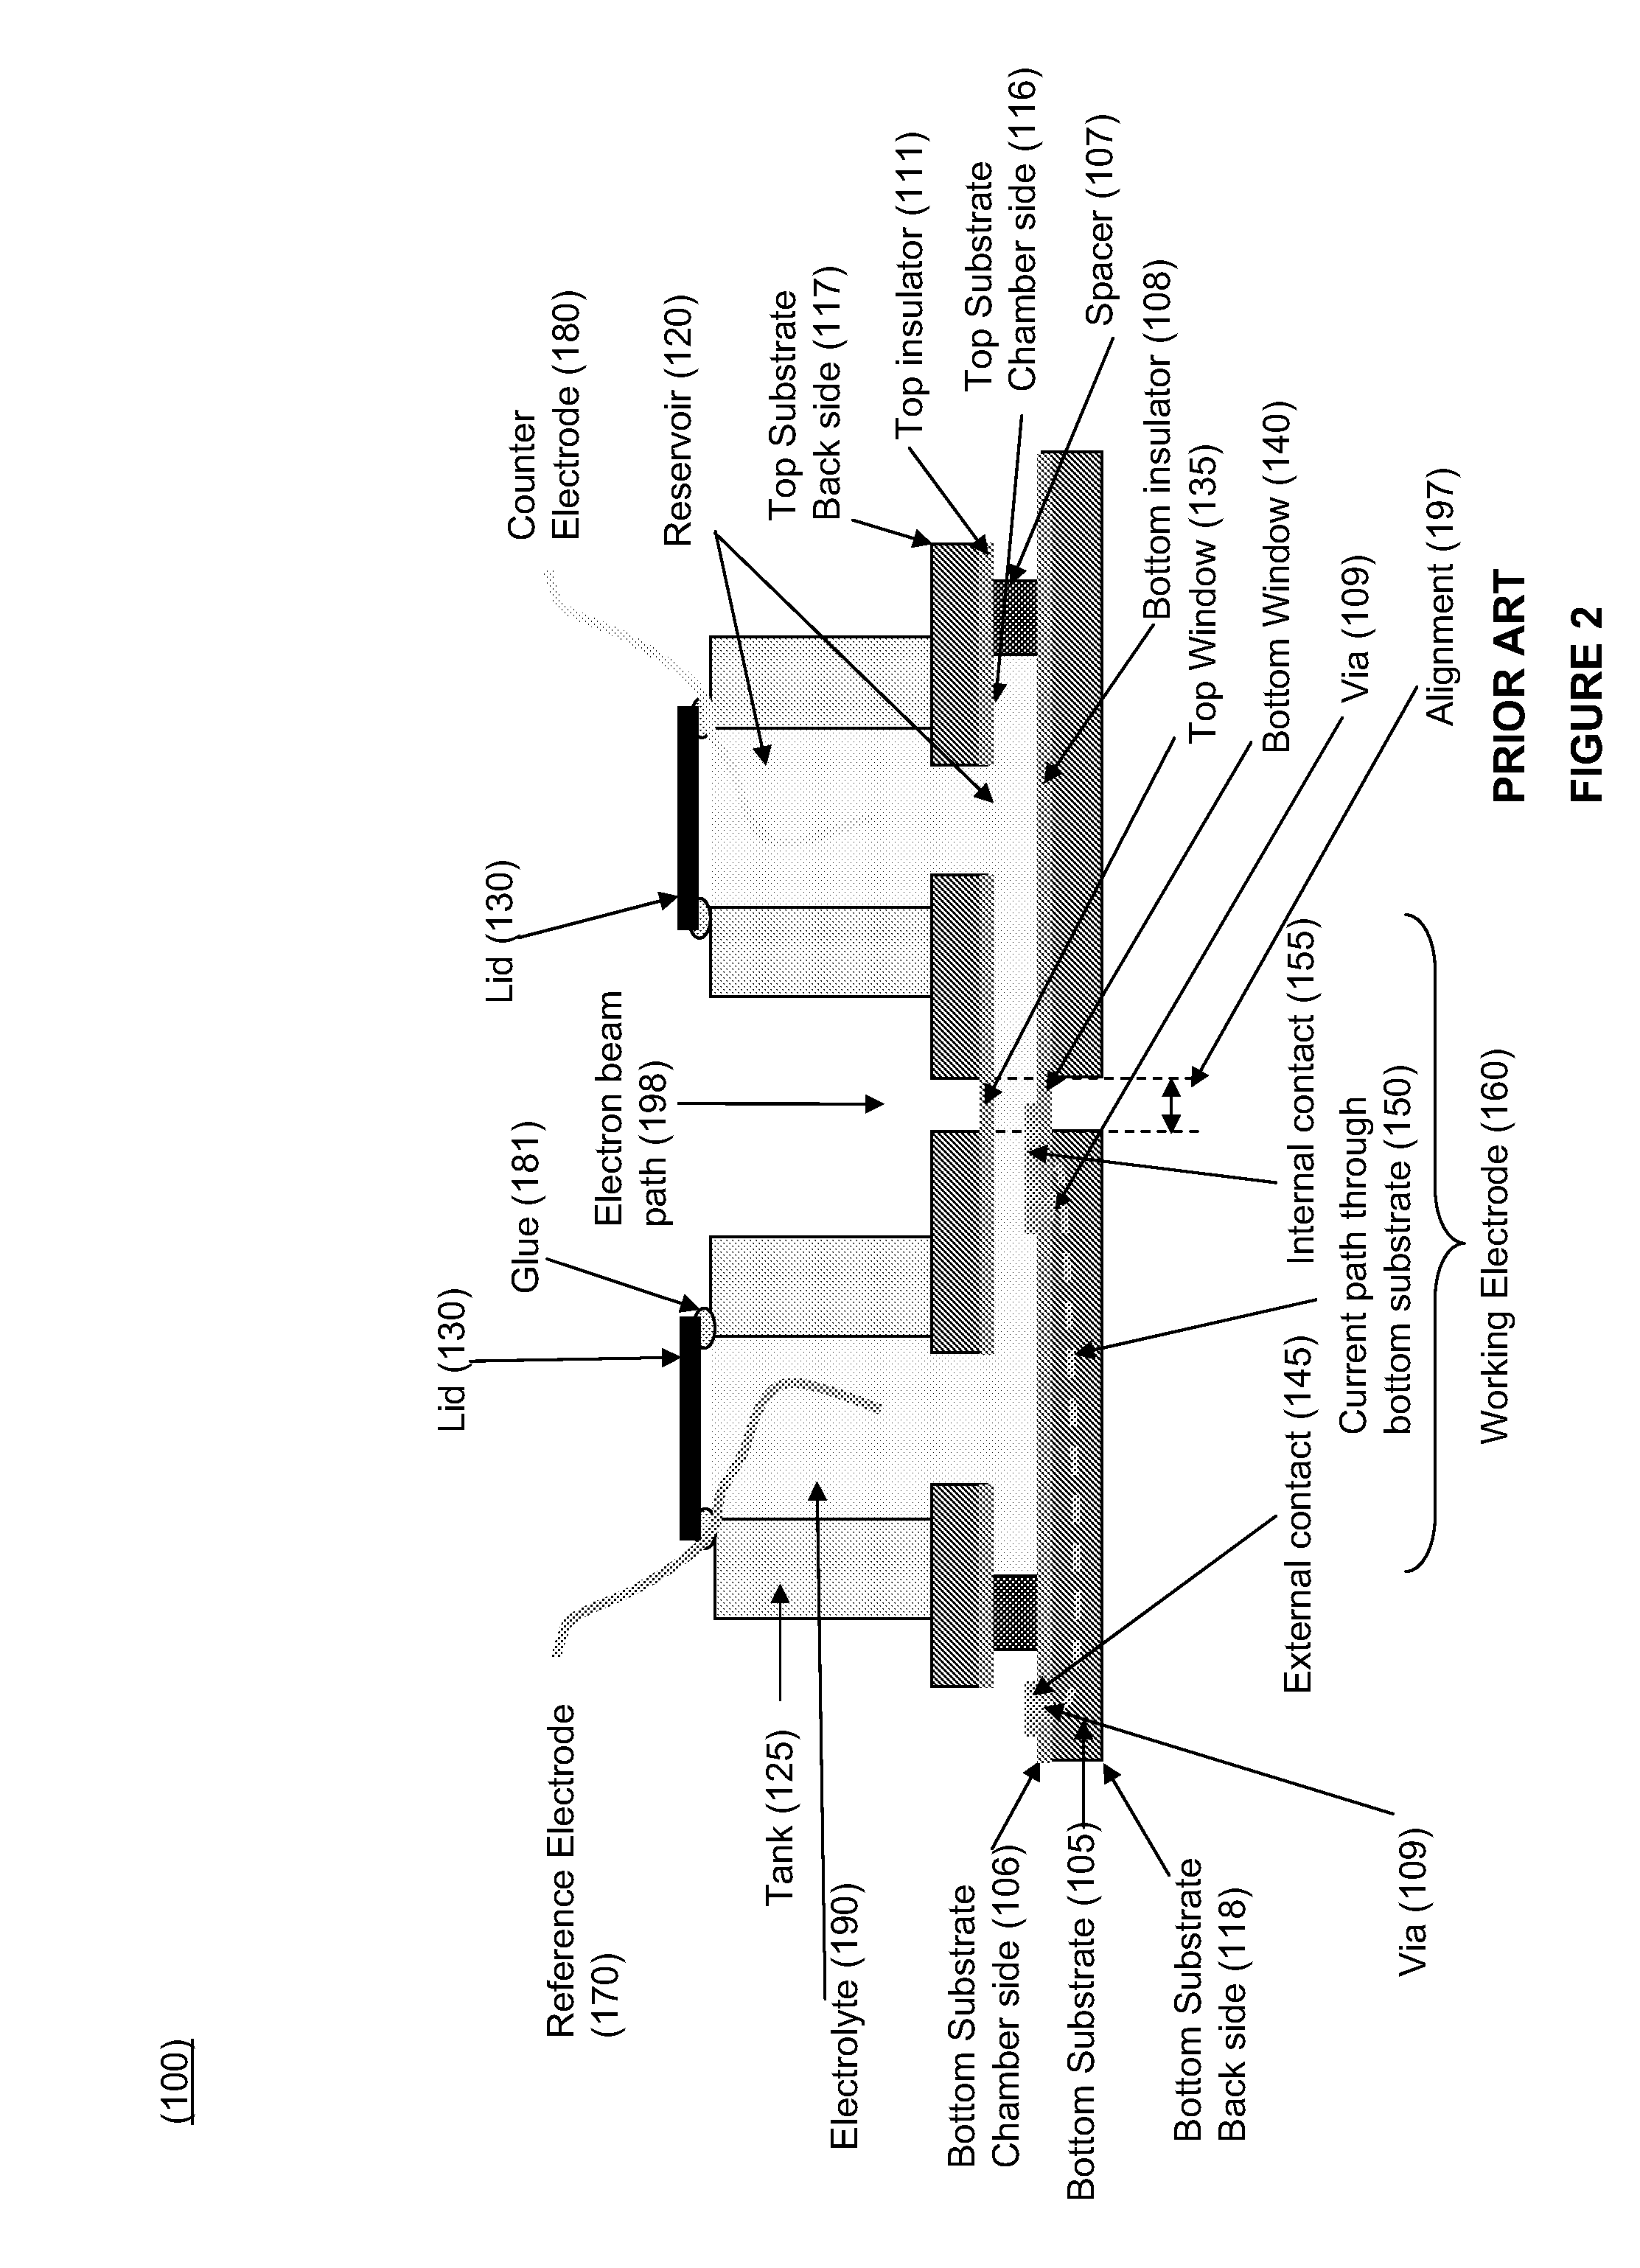 Electrochemical liquid cell apparatus